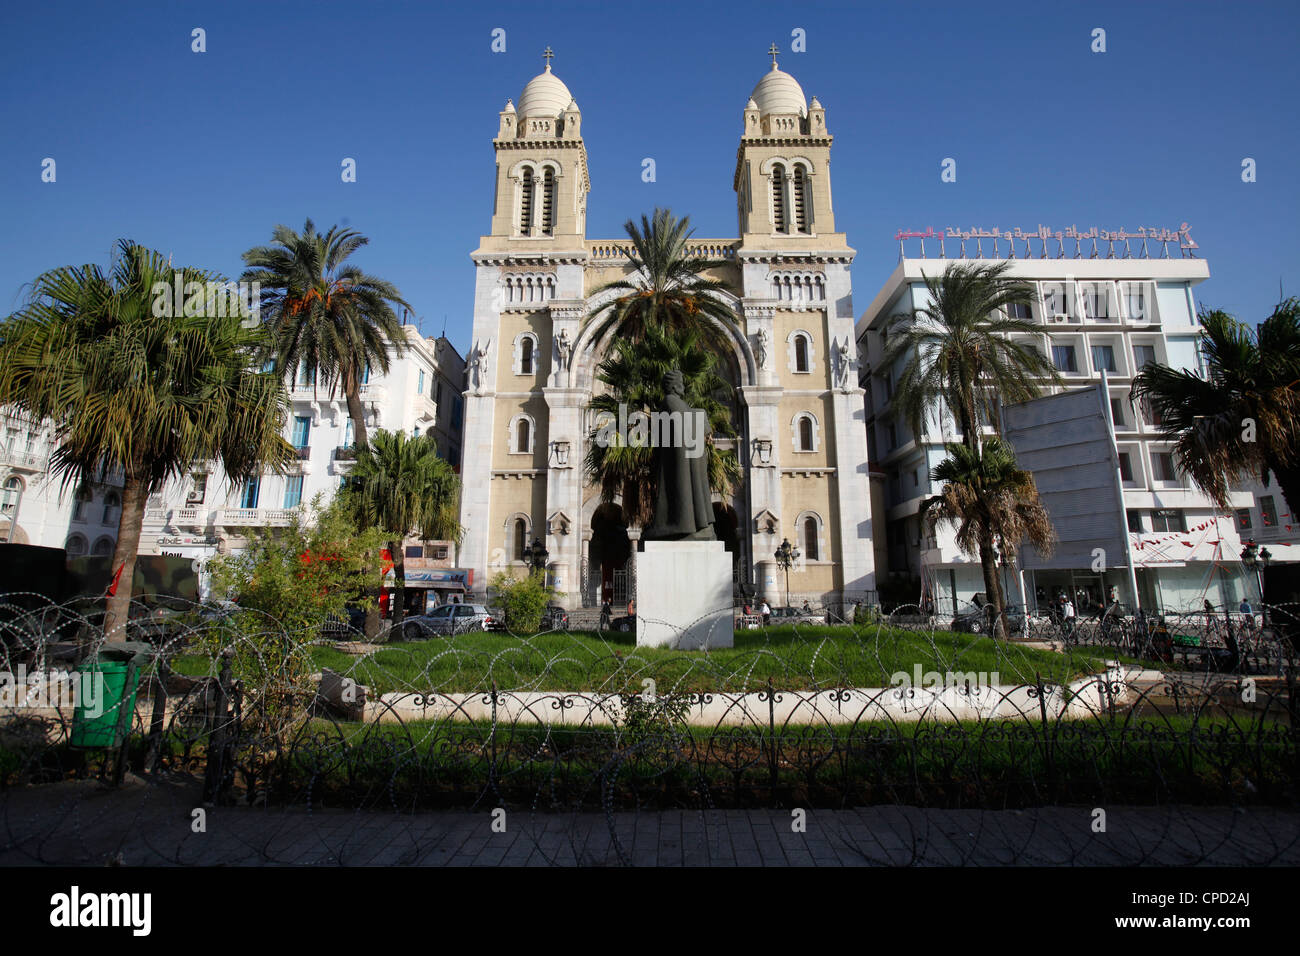 St. Louis's cathedral, Tunis, Tunisia, North Africa, Africa Stock Photo